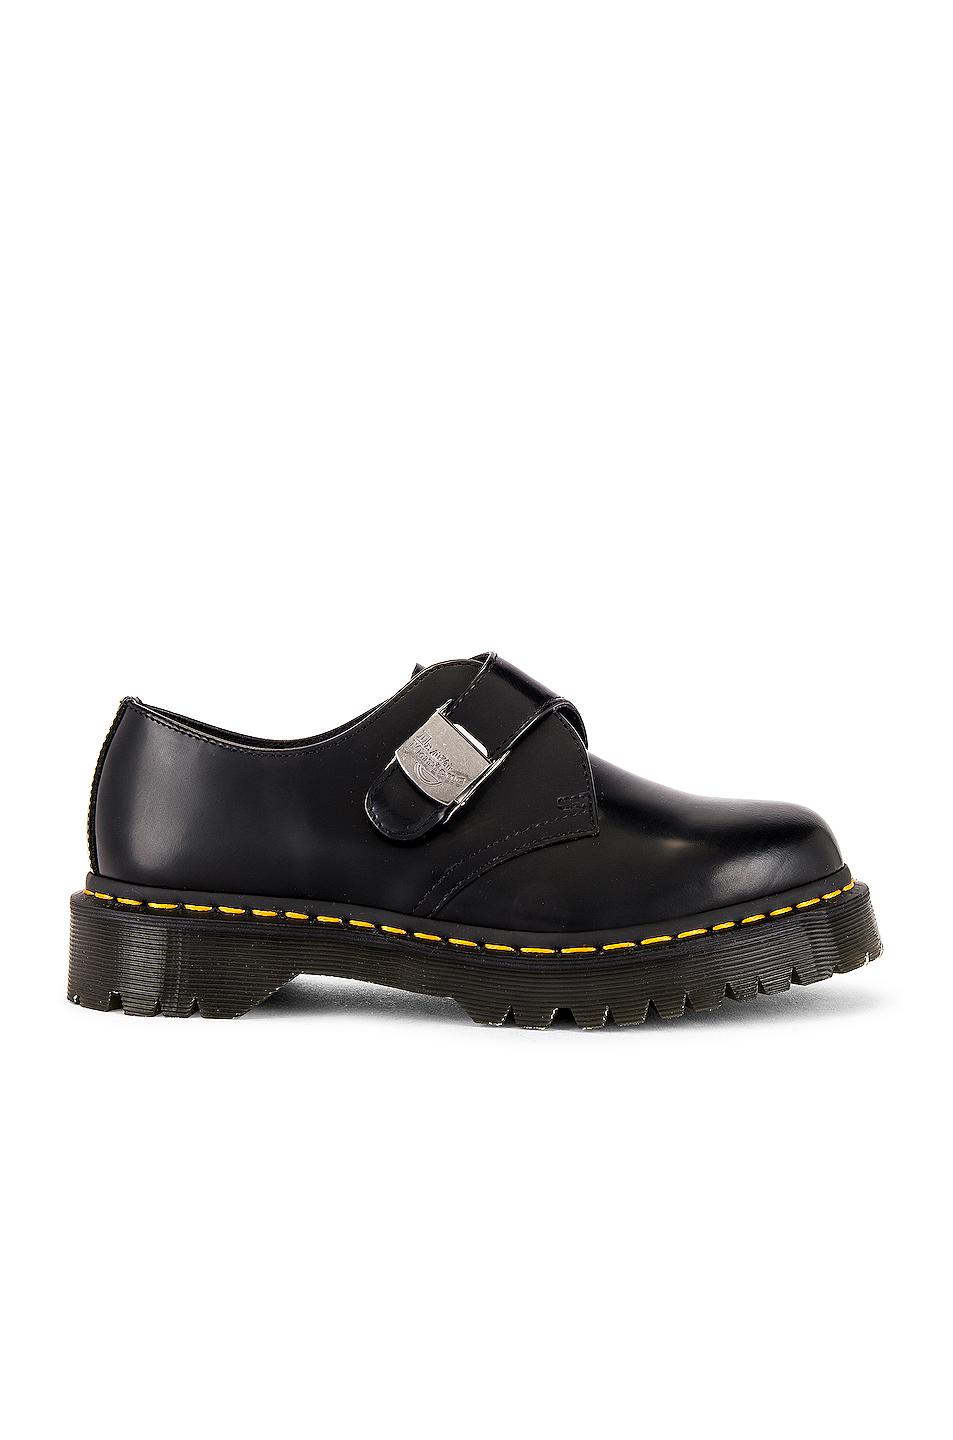 Dr. Martens Leather Fenimore Low in Black for Men - Lyst